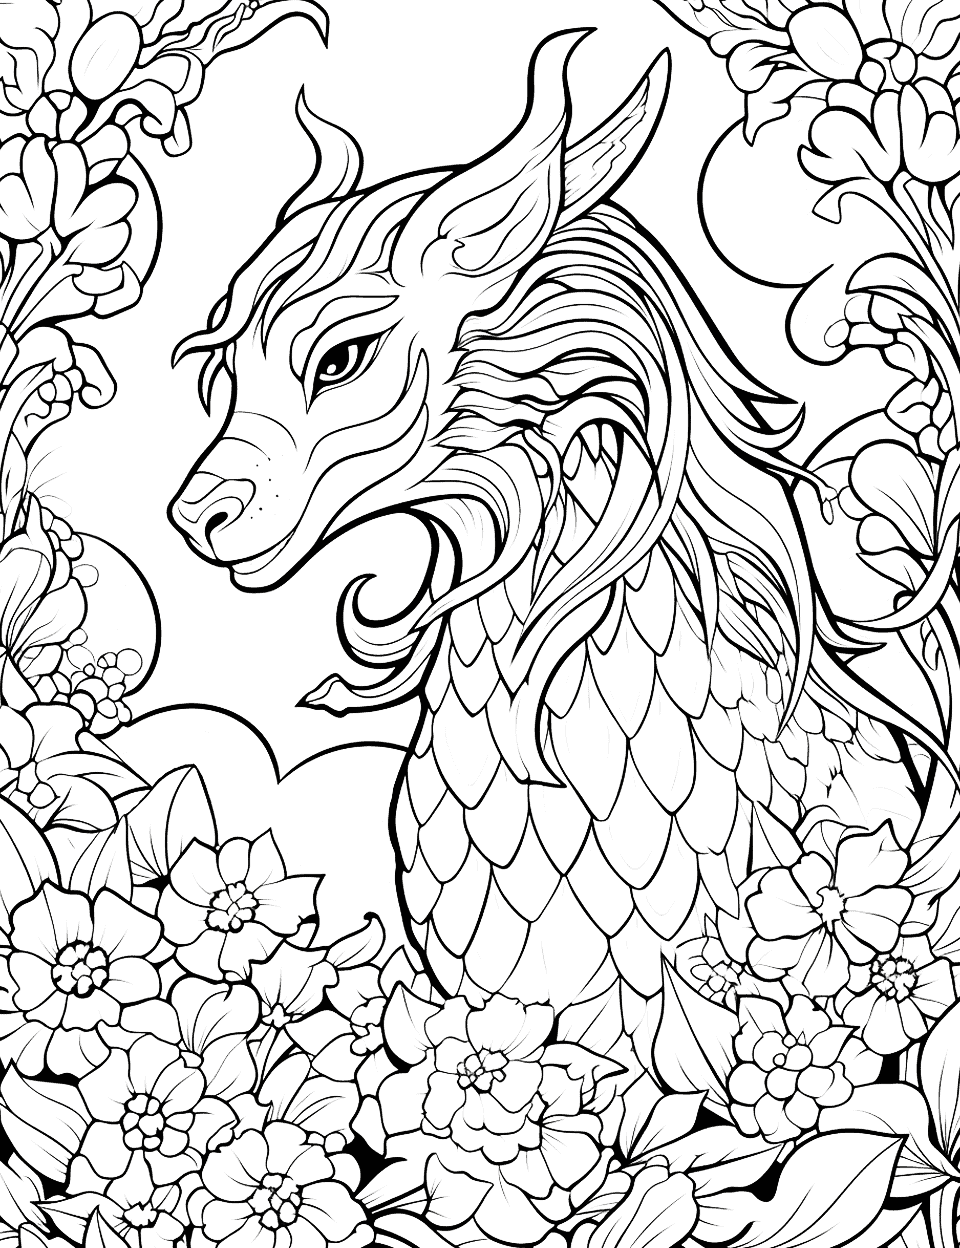 Dragon's Garden Adult Coloring Page - A dragon tending to a magical garden filled with exotic plants.